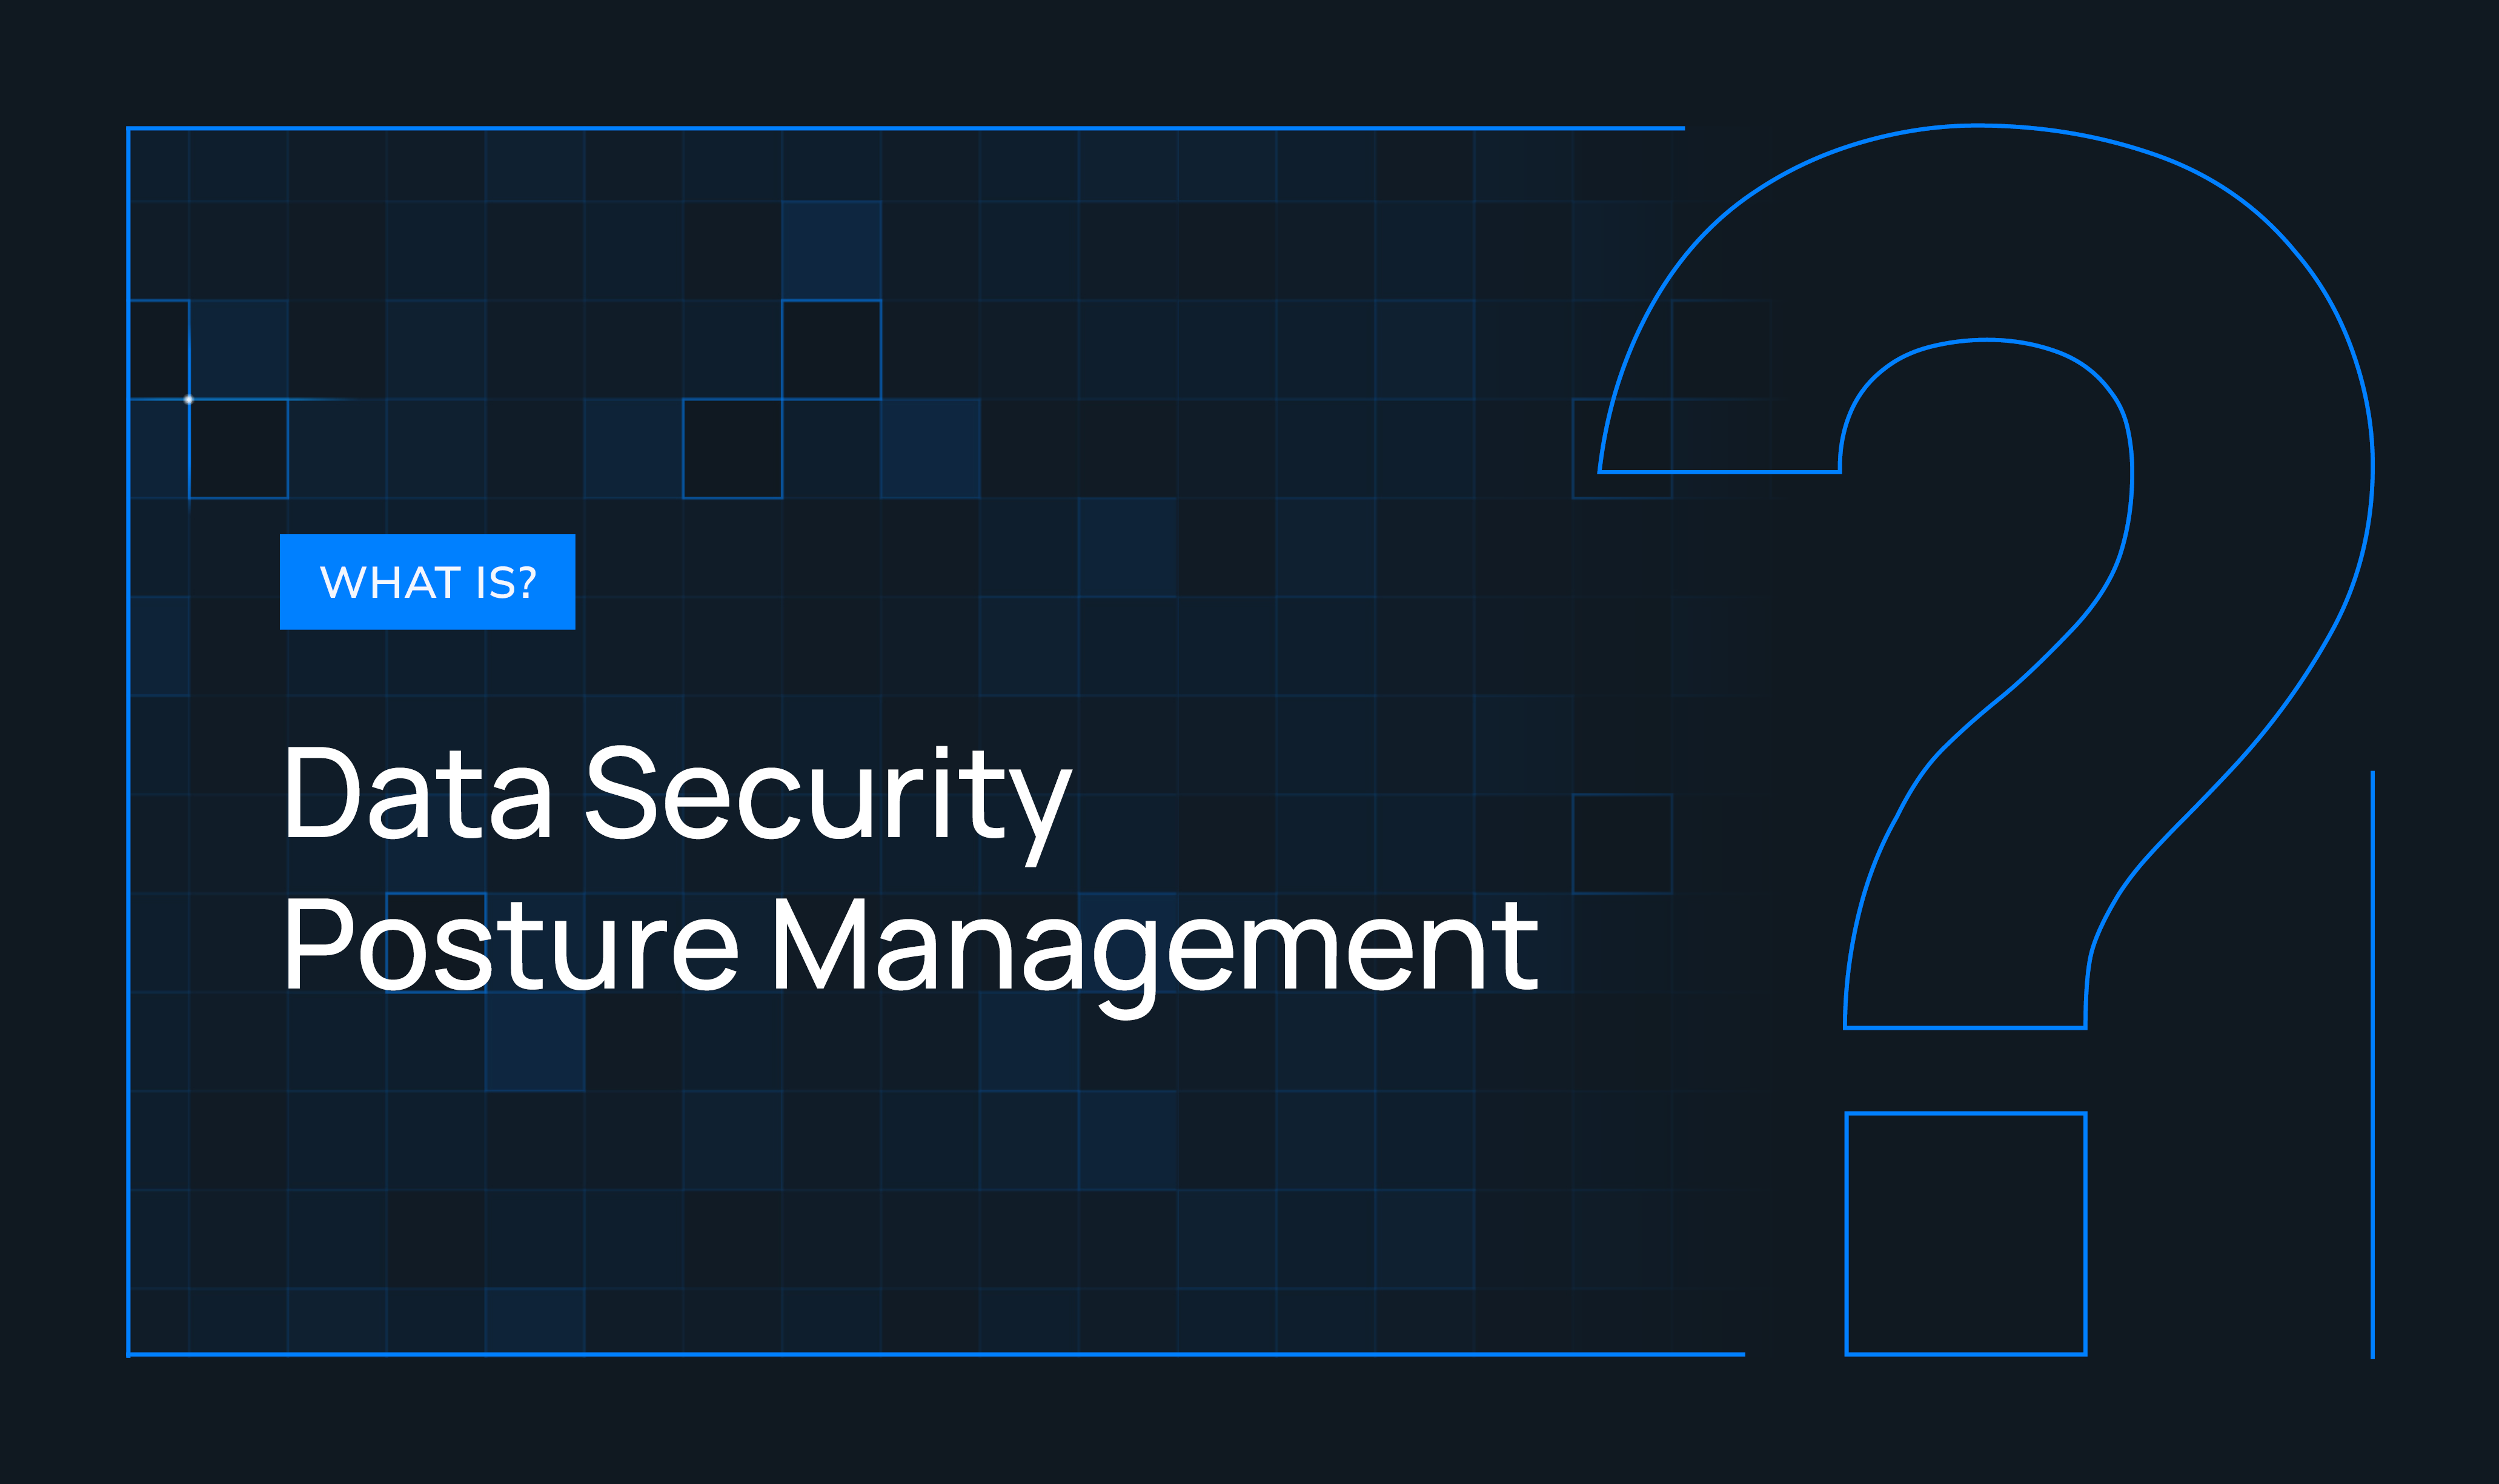 What is Data Security Posture Management?